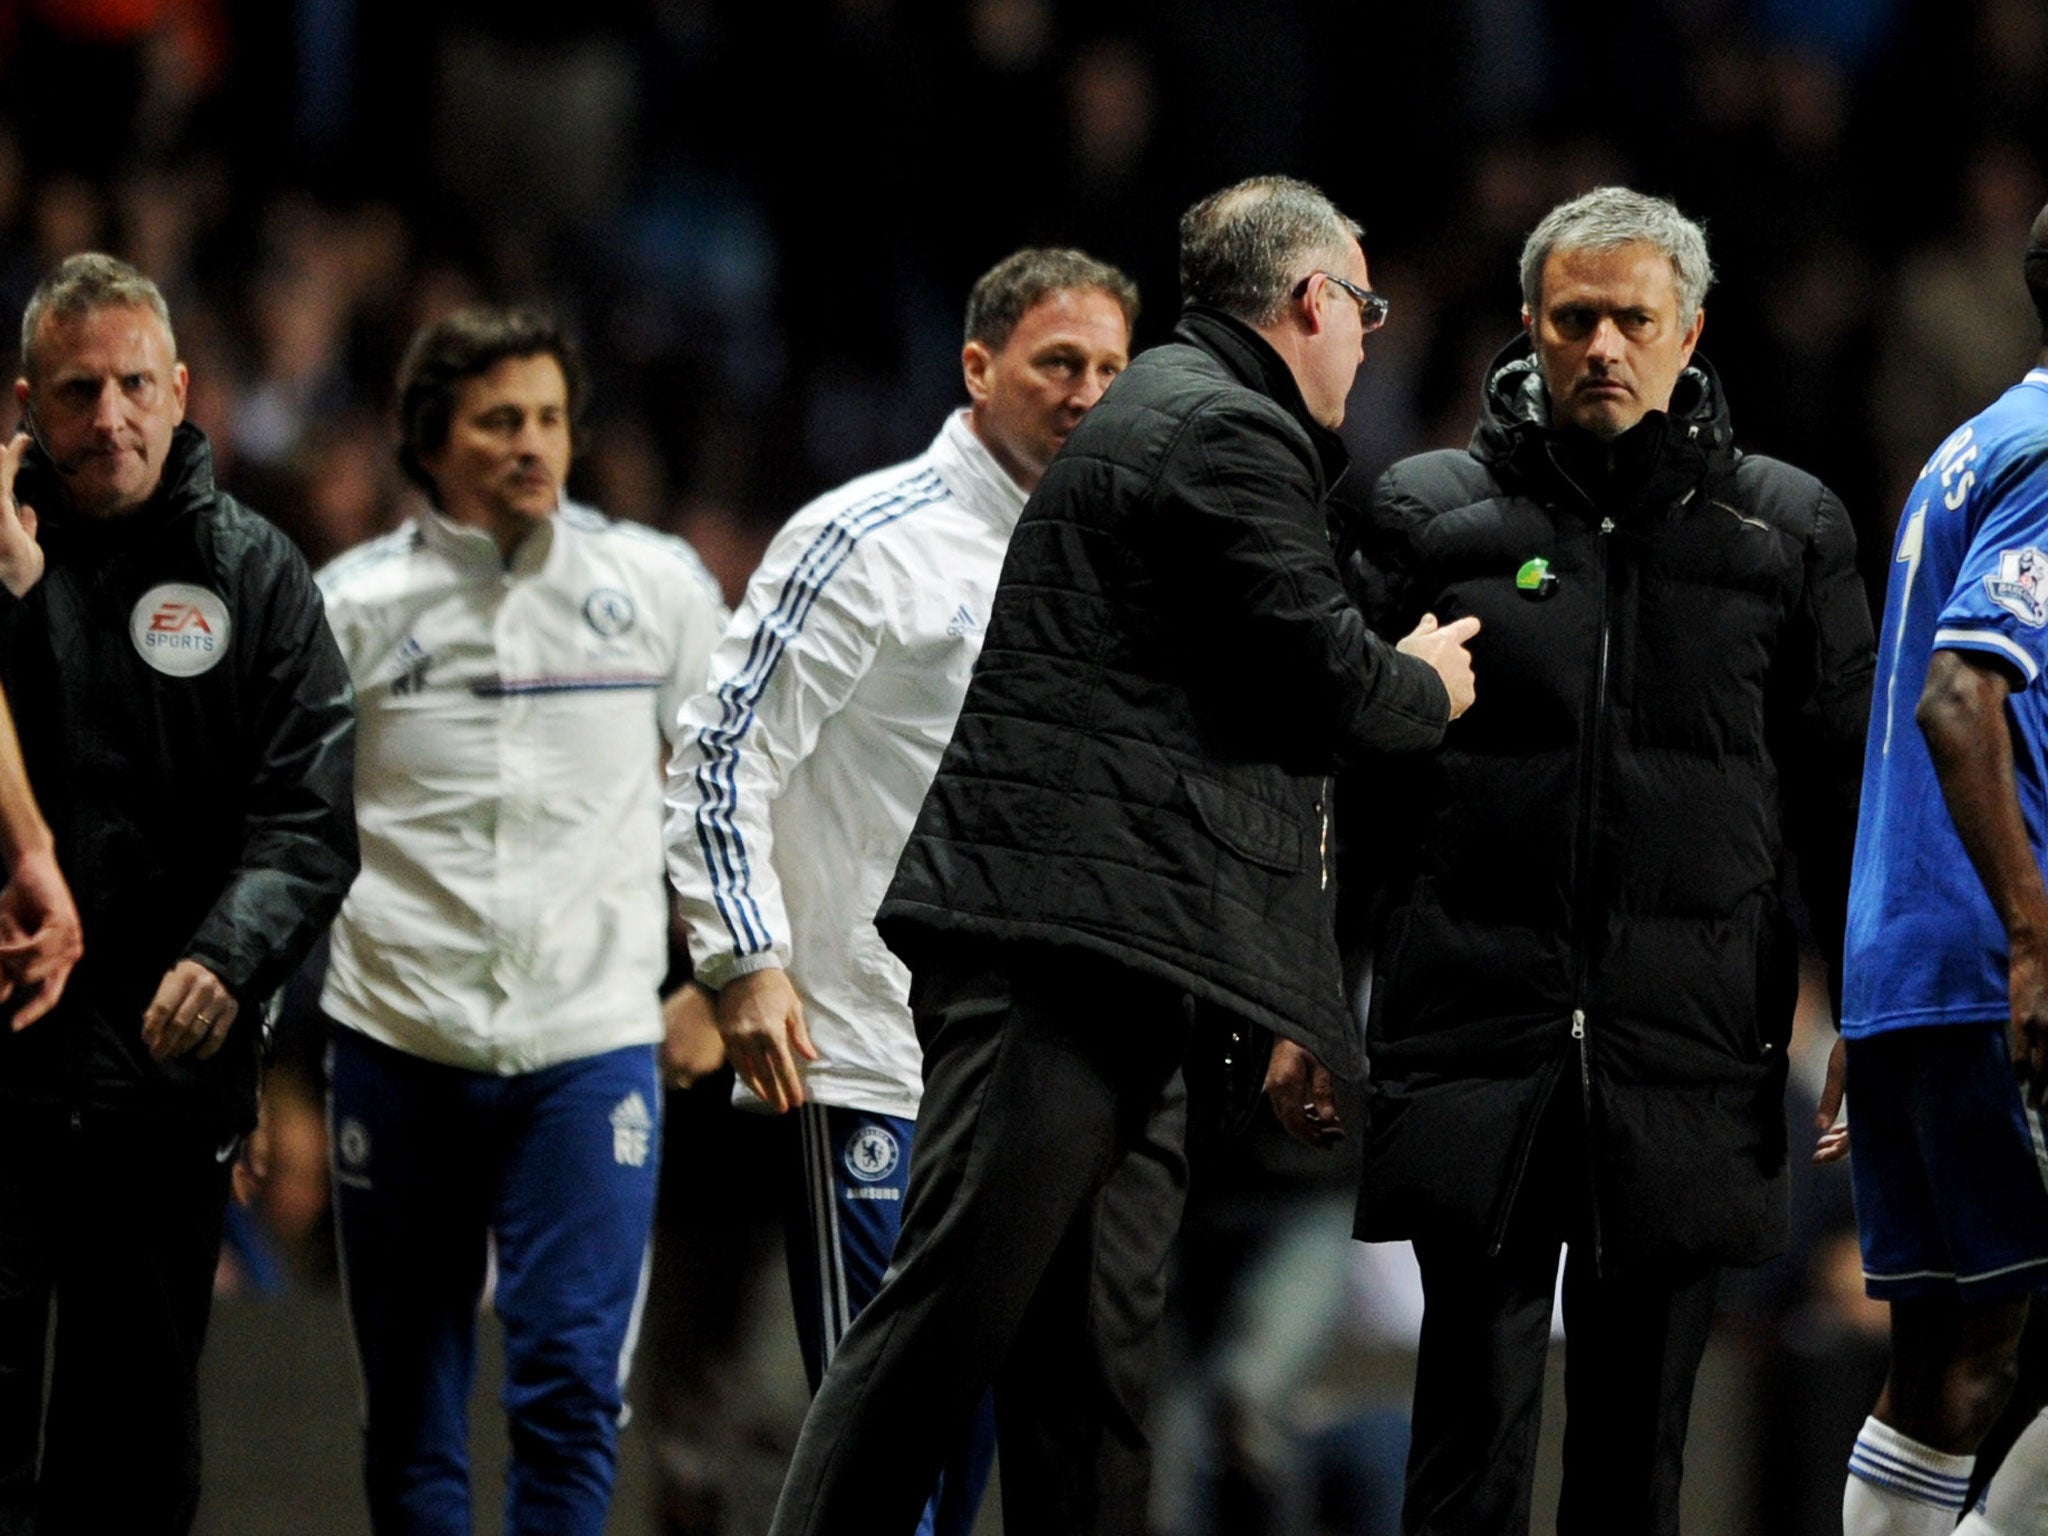 Jose Mourinho was sent to the stands in Chelsea's 1-0 defeat by Aston Villa